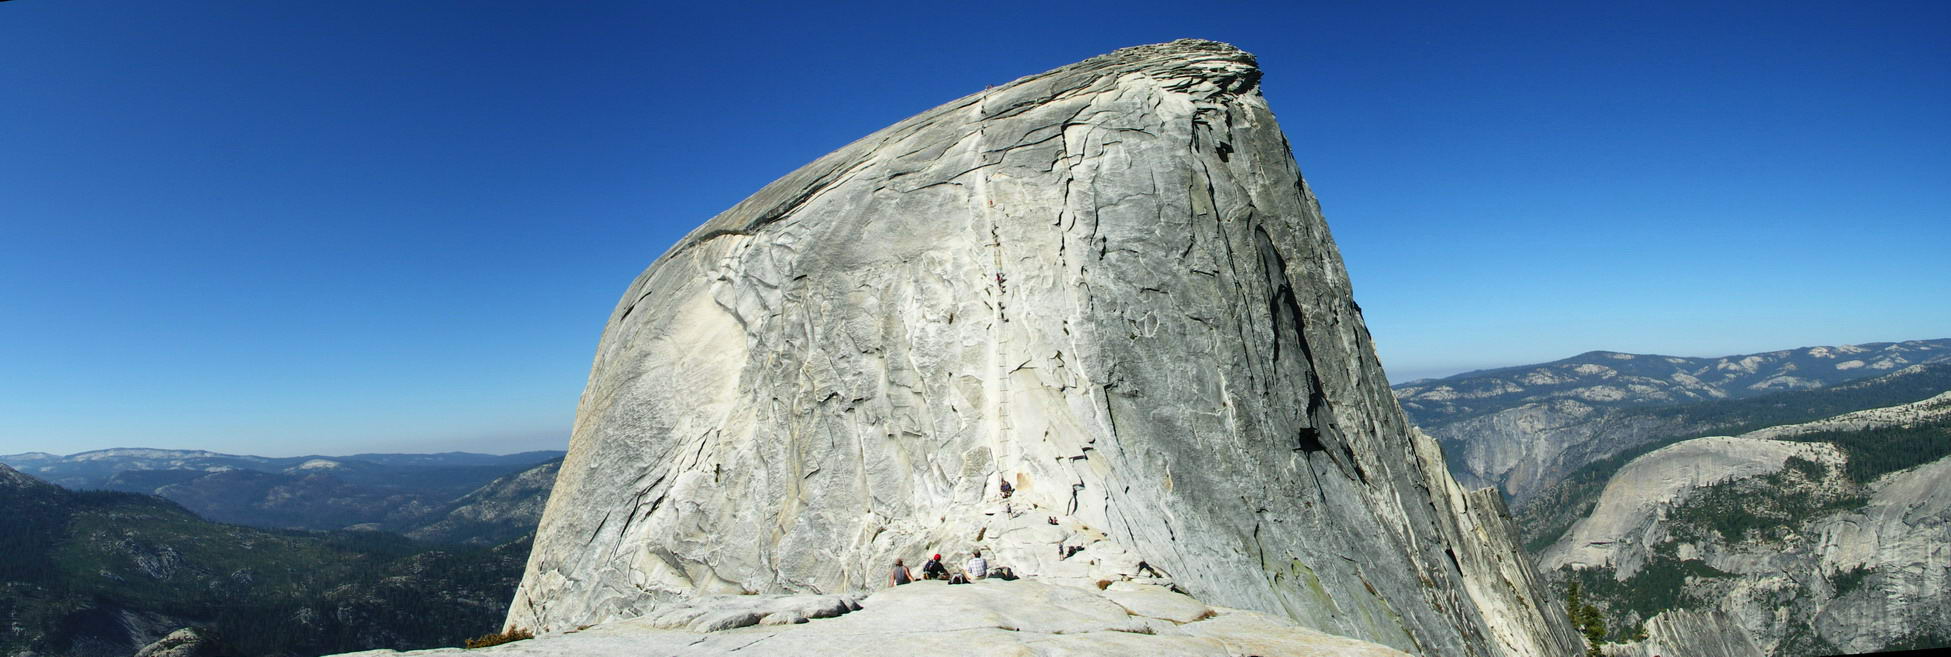 HalfDome_Cables_Pano_resize